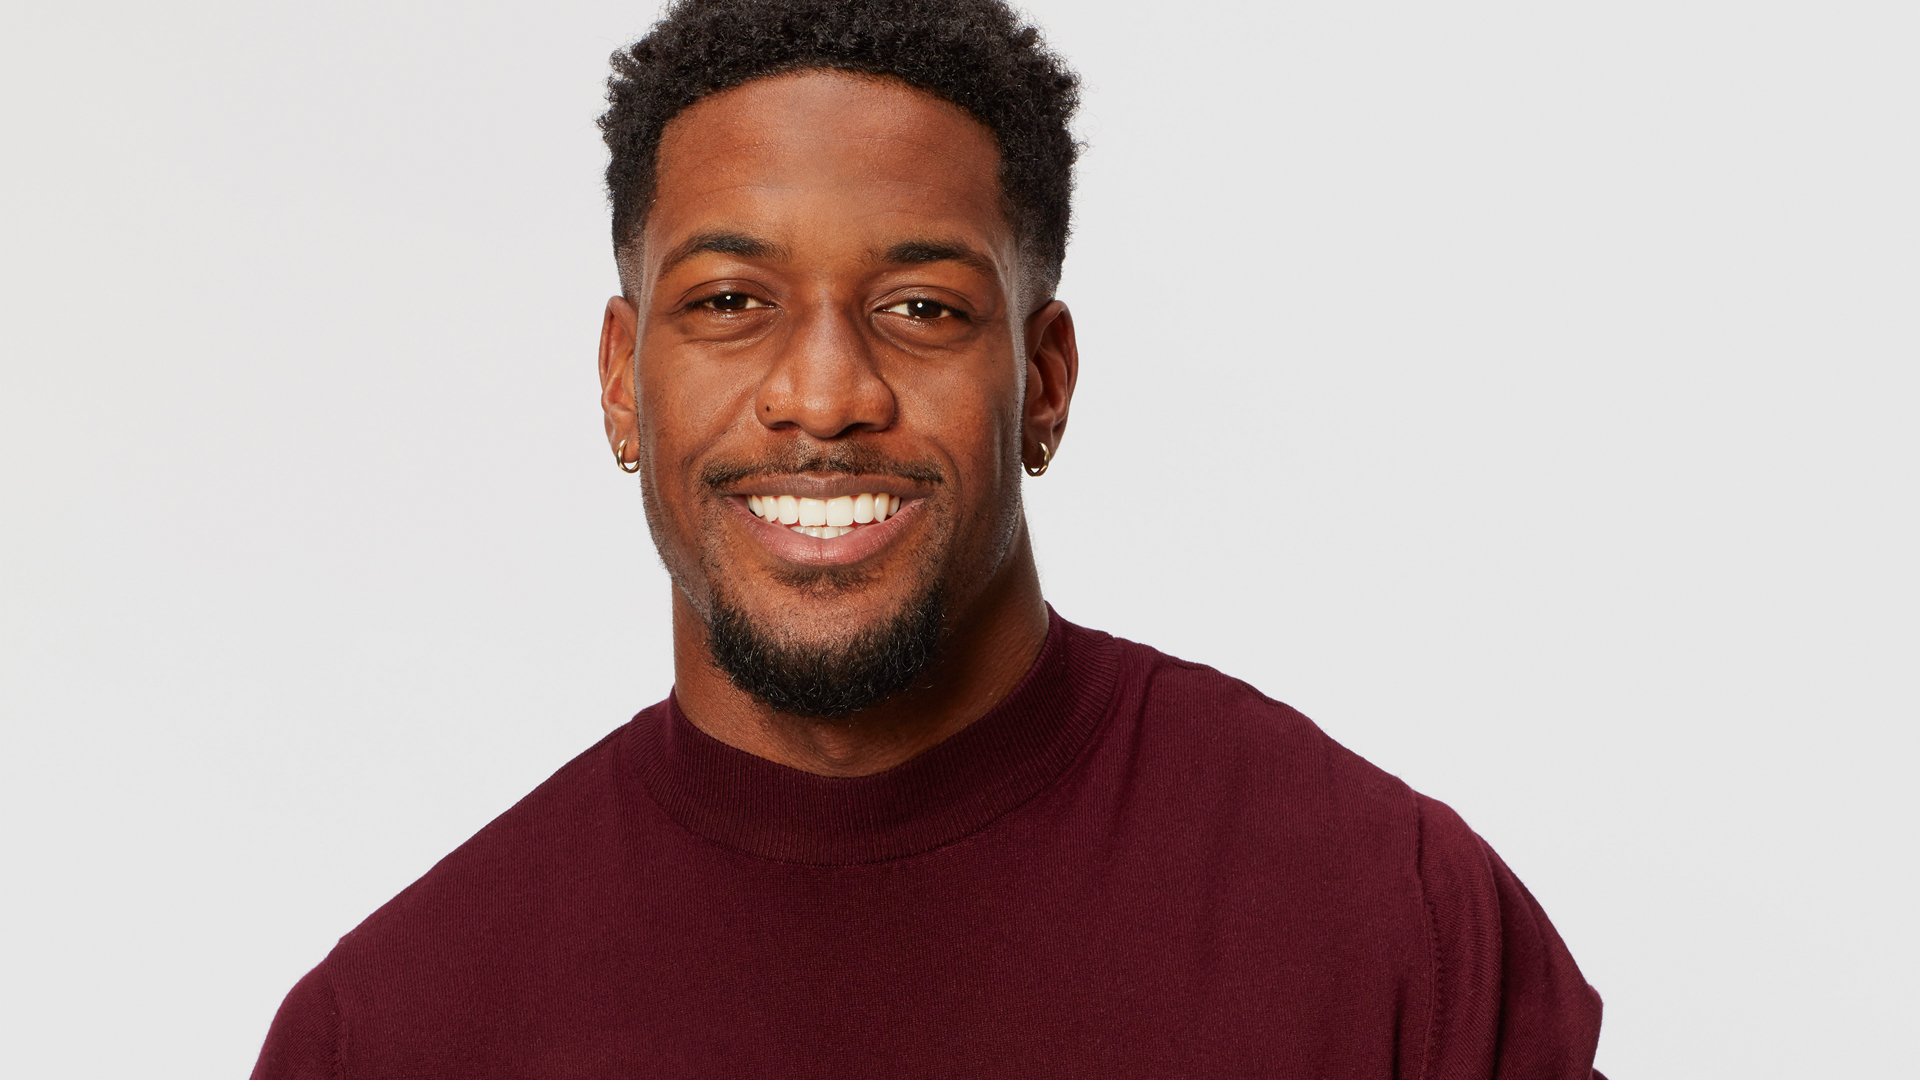 Demar from 'The Bachelorette' 2020